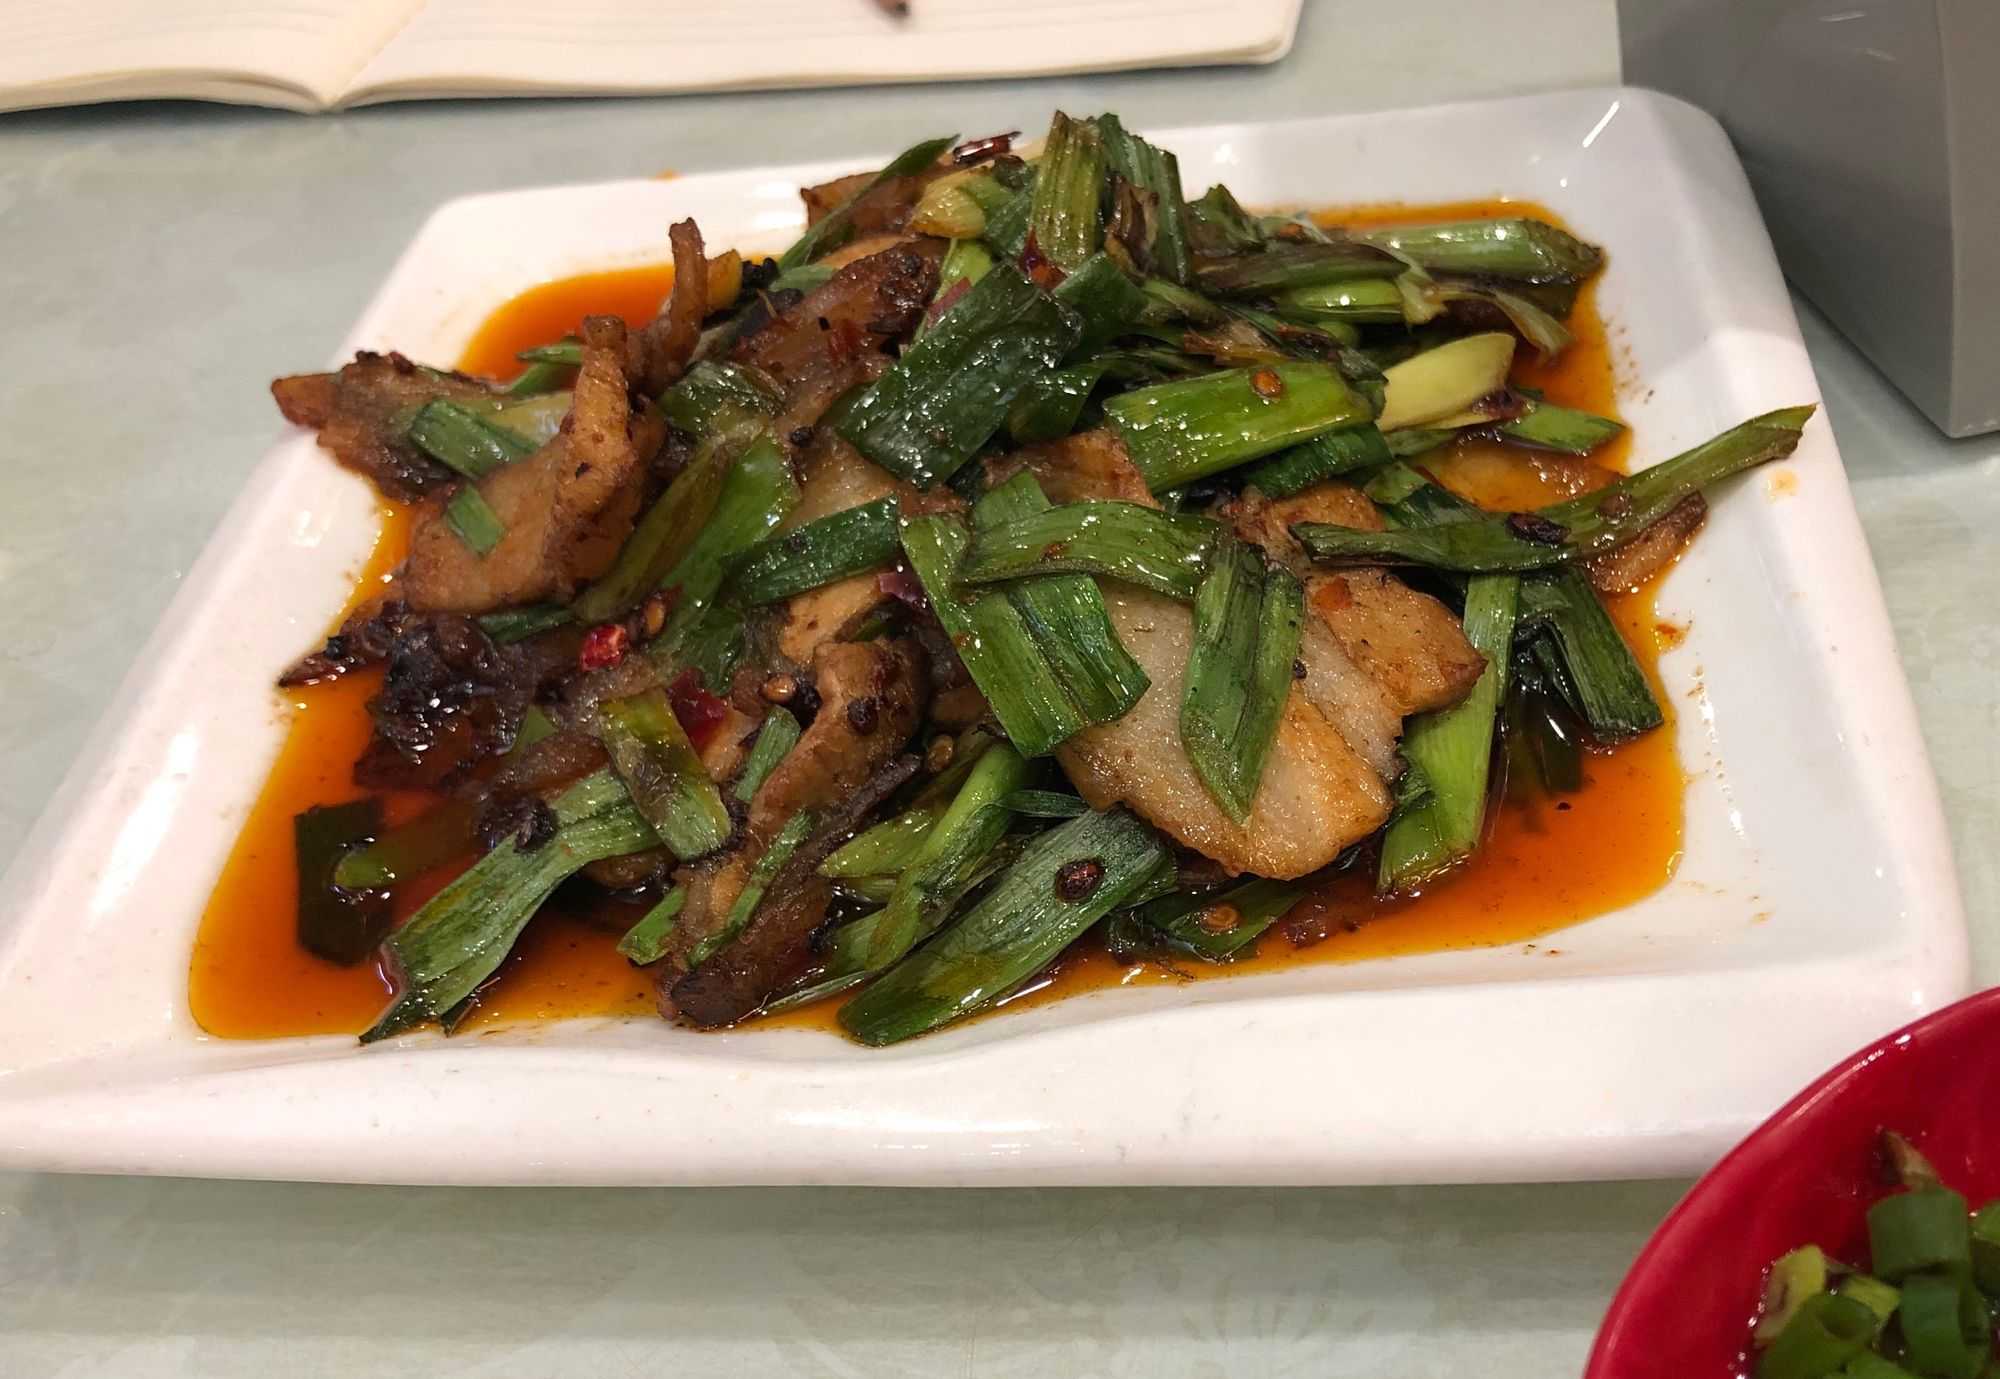 Twice-cooked pork (回锅肉) (Image by author)